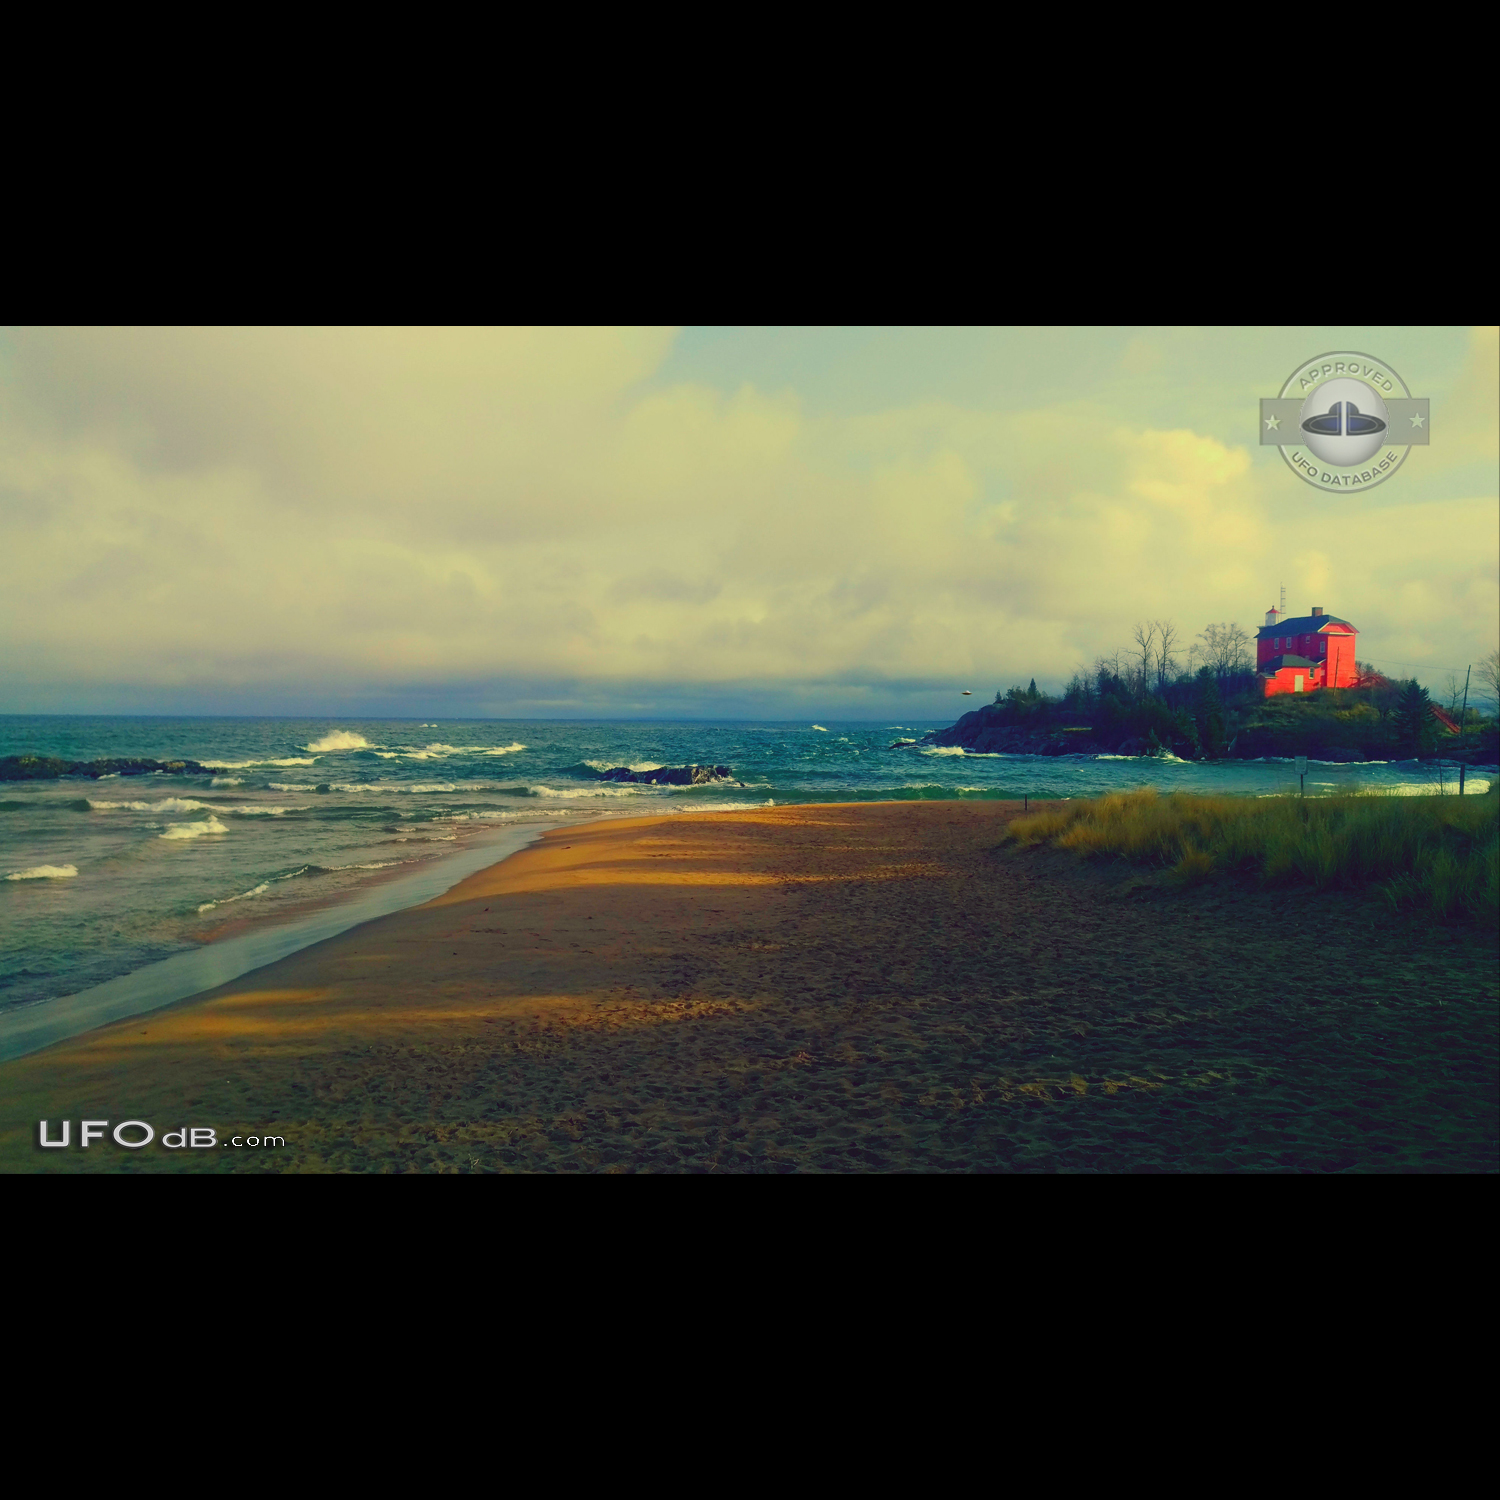 This oval shaped object hovered over the beach for 2 minutes Michigan  UFO Picture #768-1